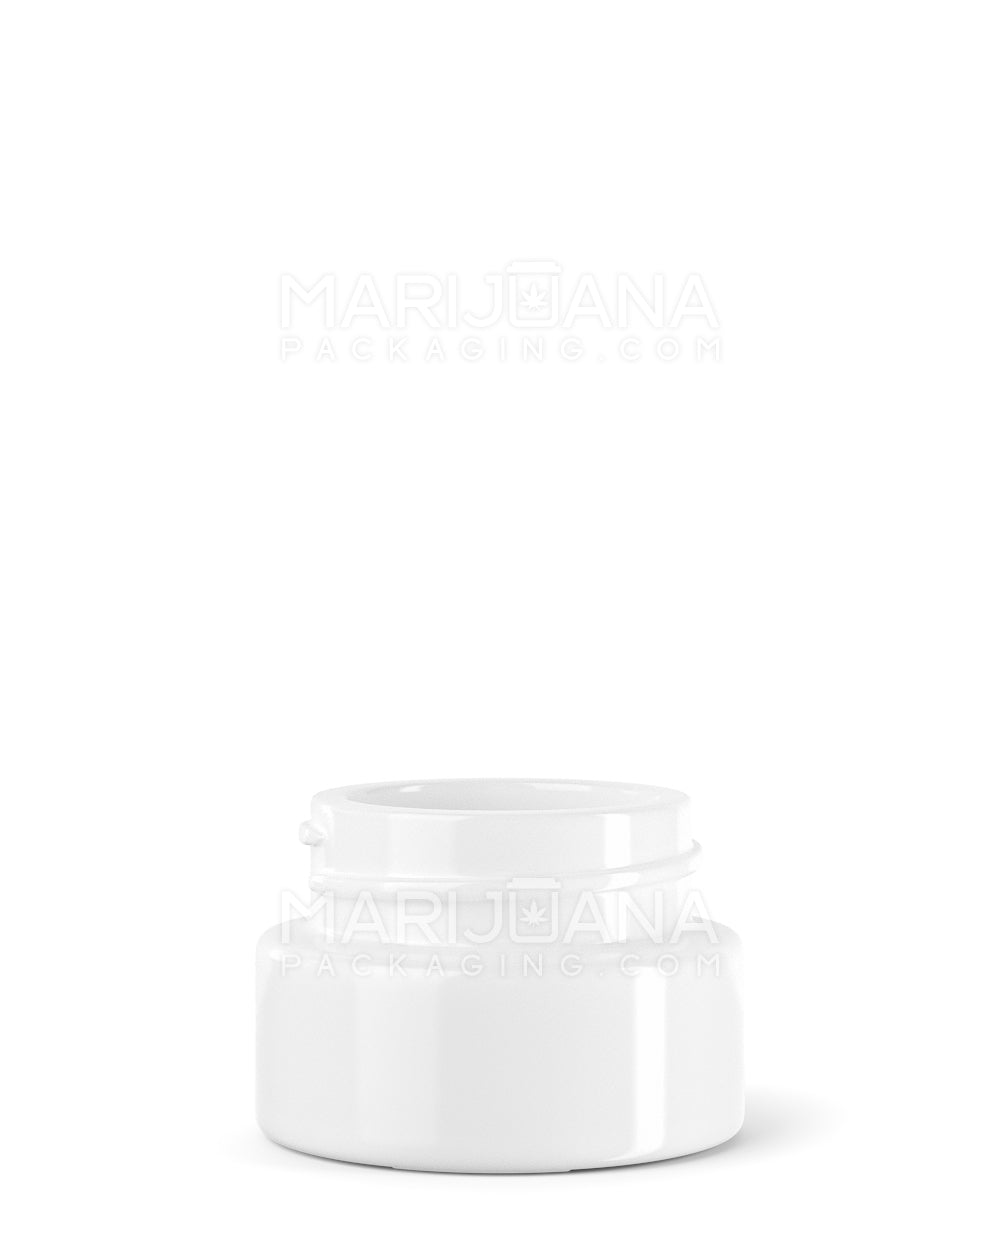 Glossy White Glass Concentrate Containers | 32mm - 9mL - 320 Count - 1